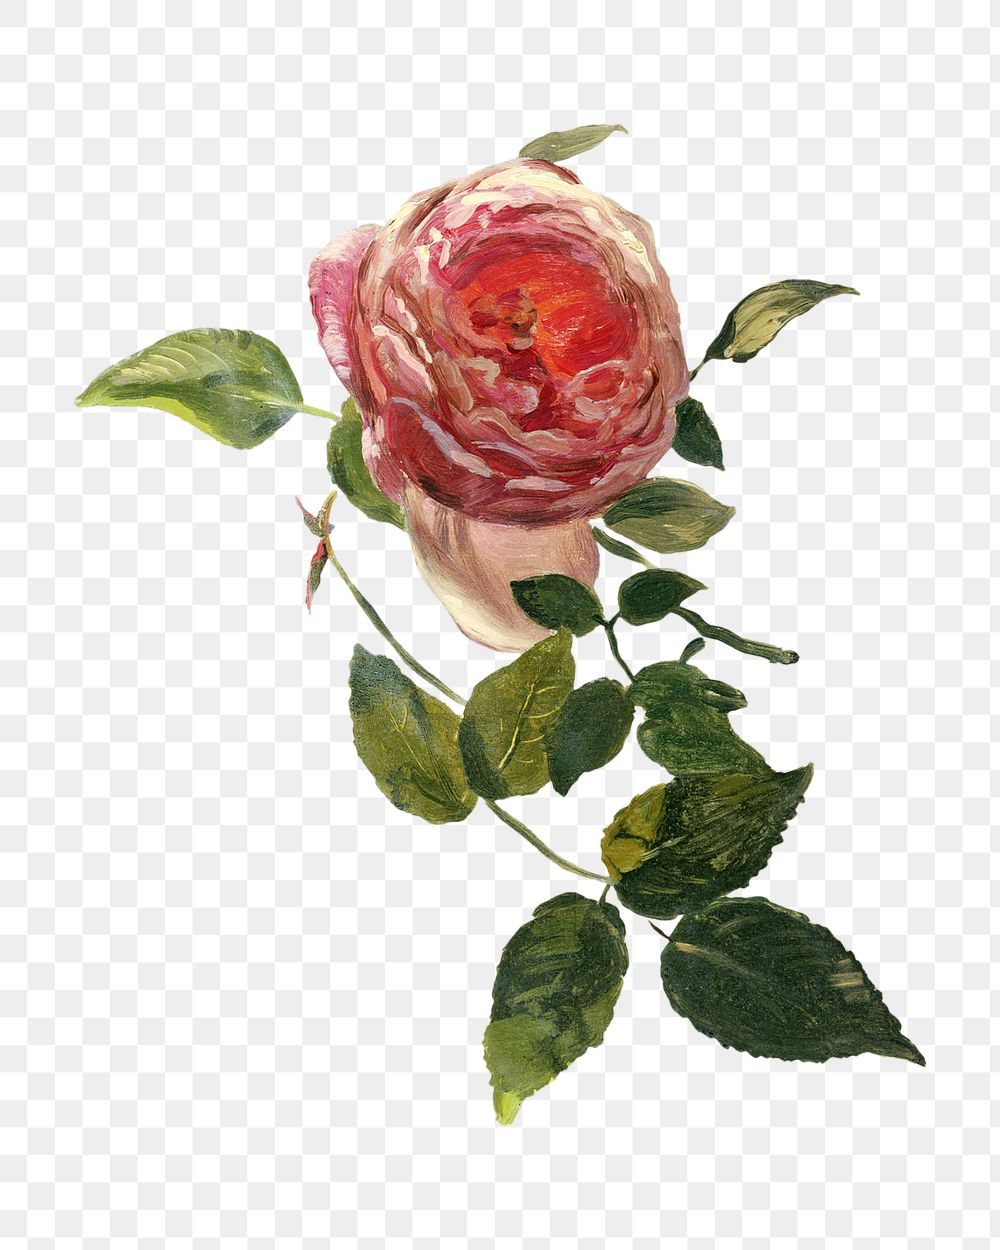 A Rose Bough png, flower illustration by Frederic Edwin Church, transparent background. Remixed by rawpixel.